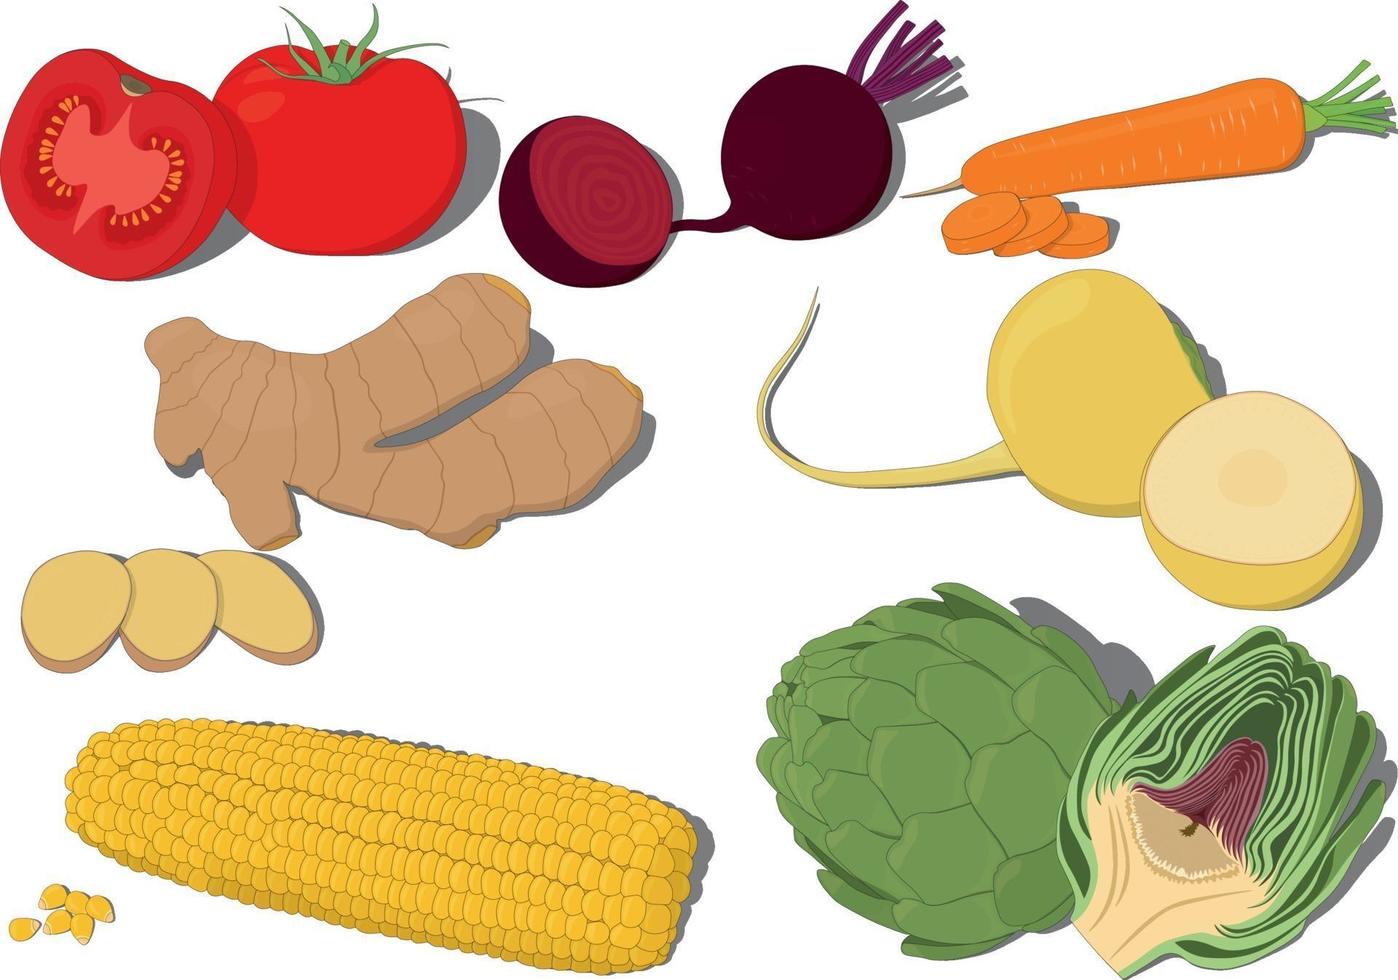 Whole and cut fresh vegetables collection vector illustration